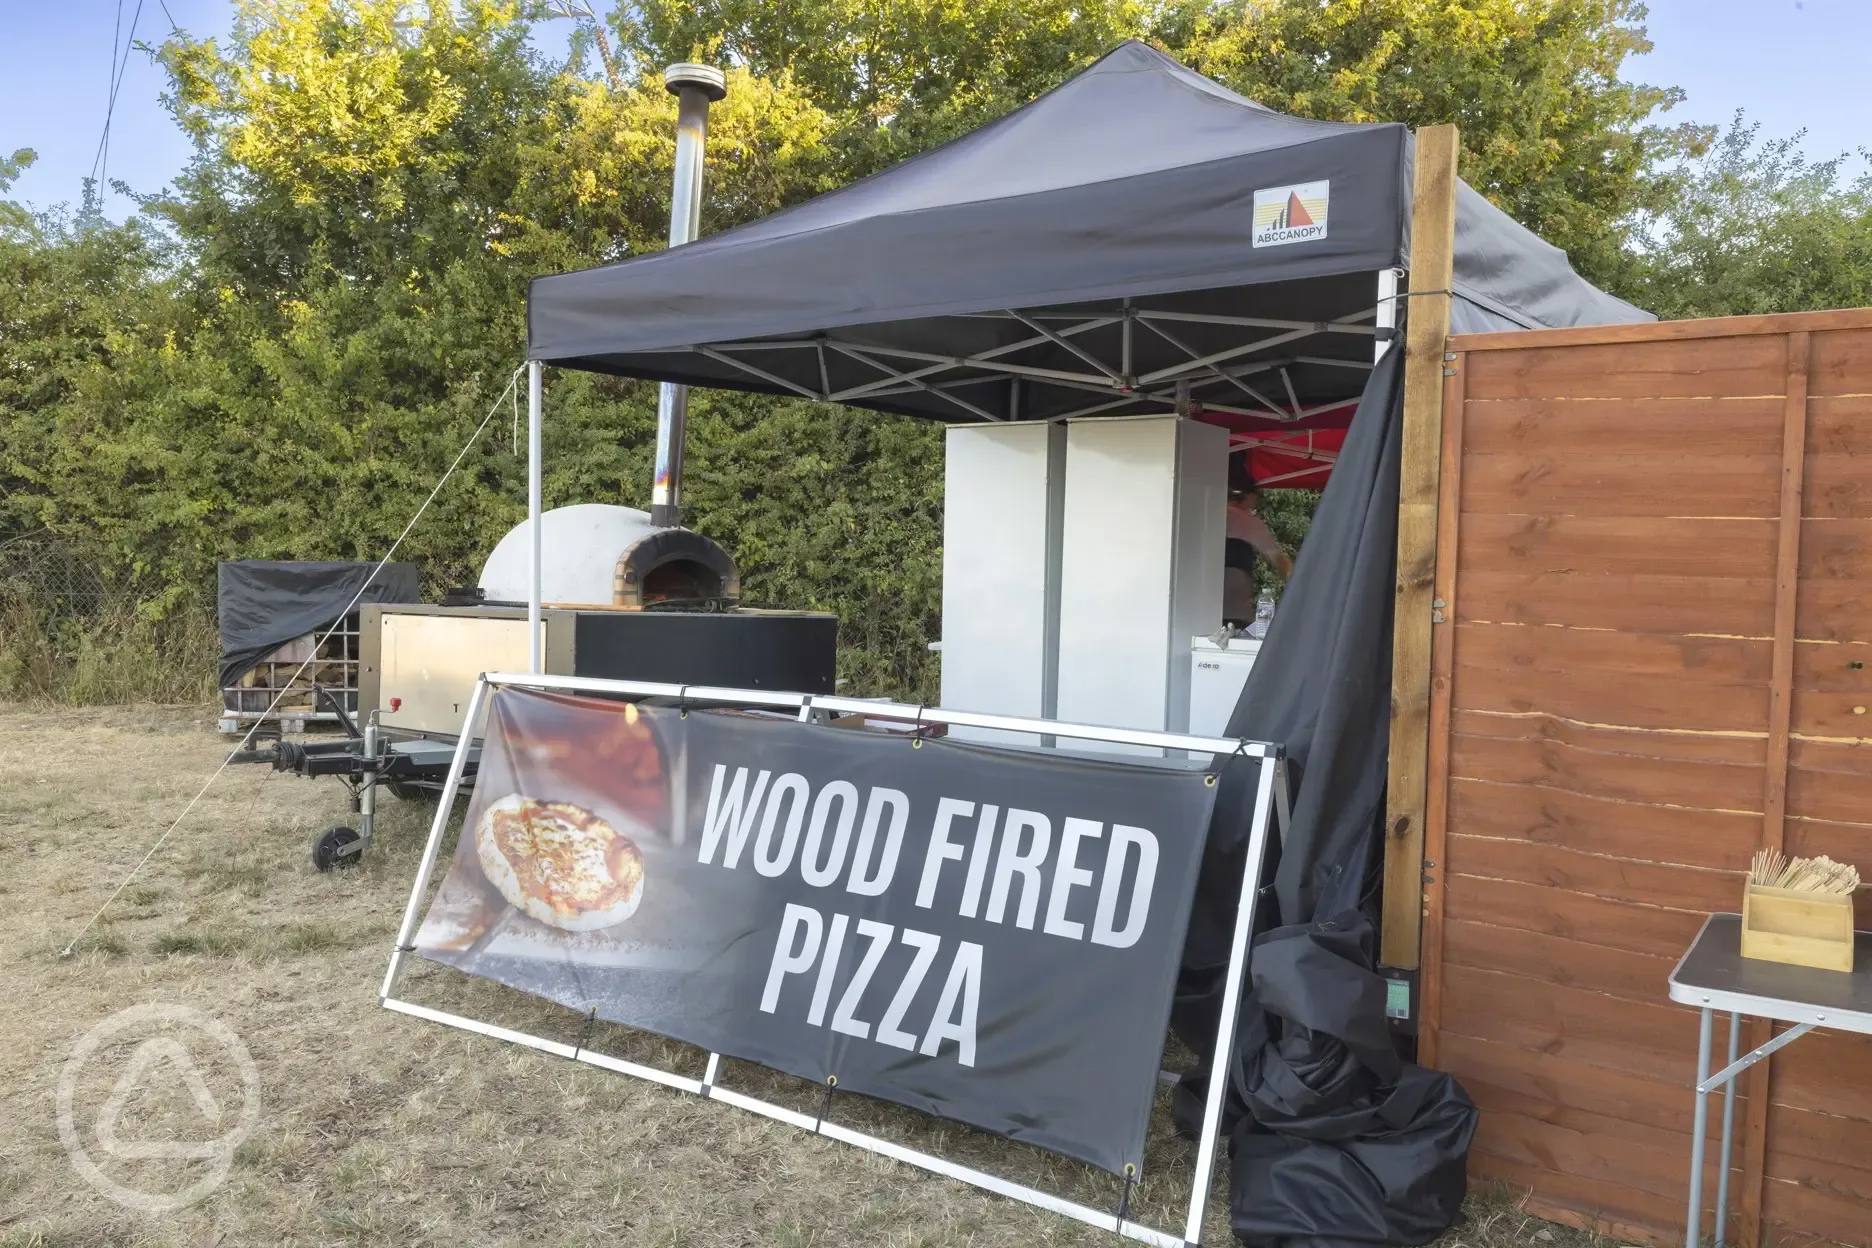 Wood fired pizza available